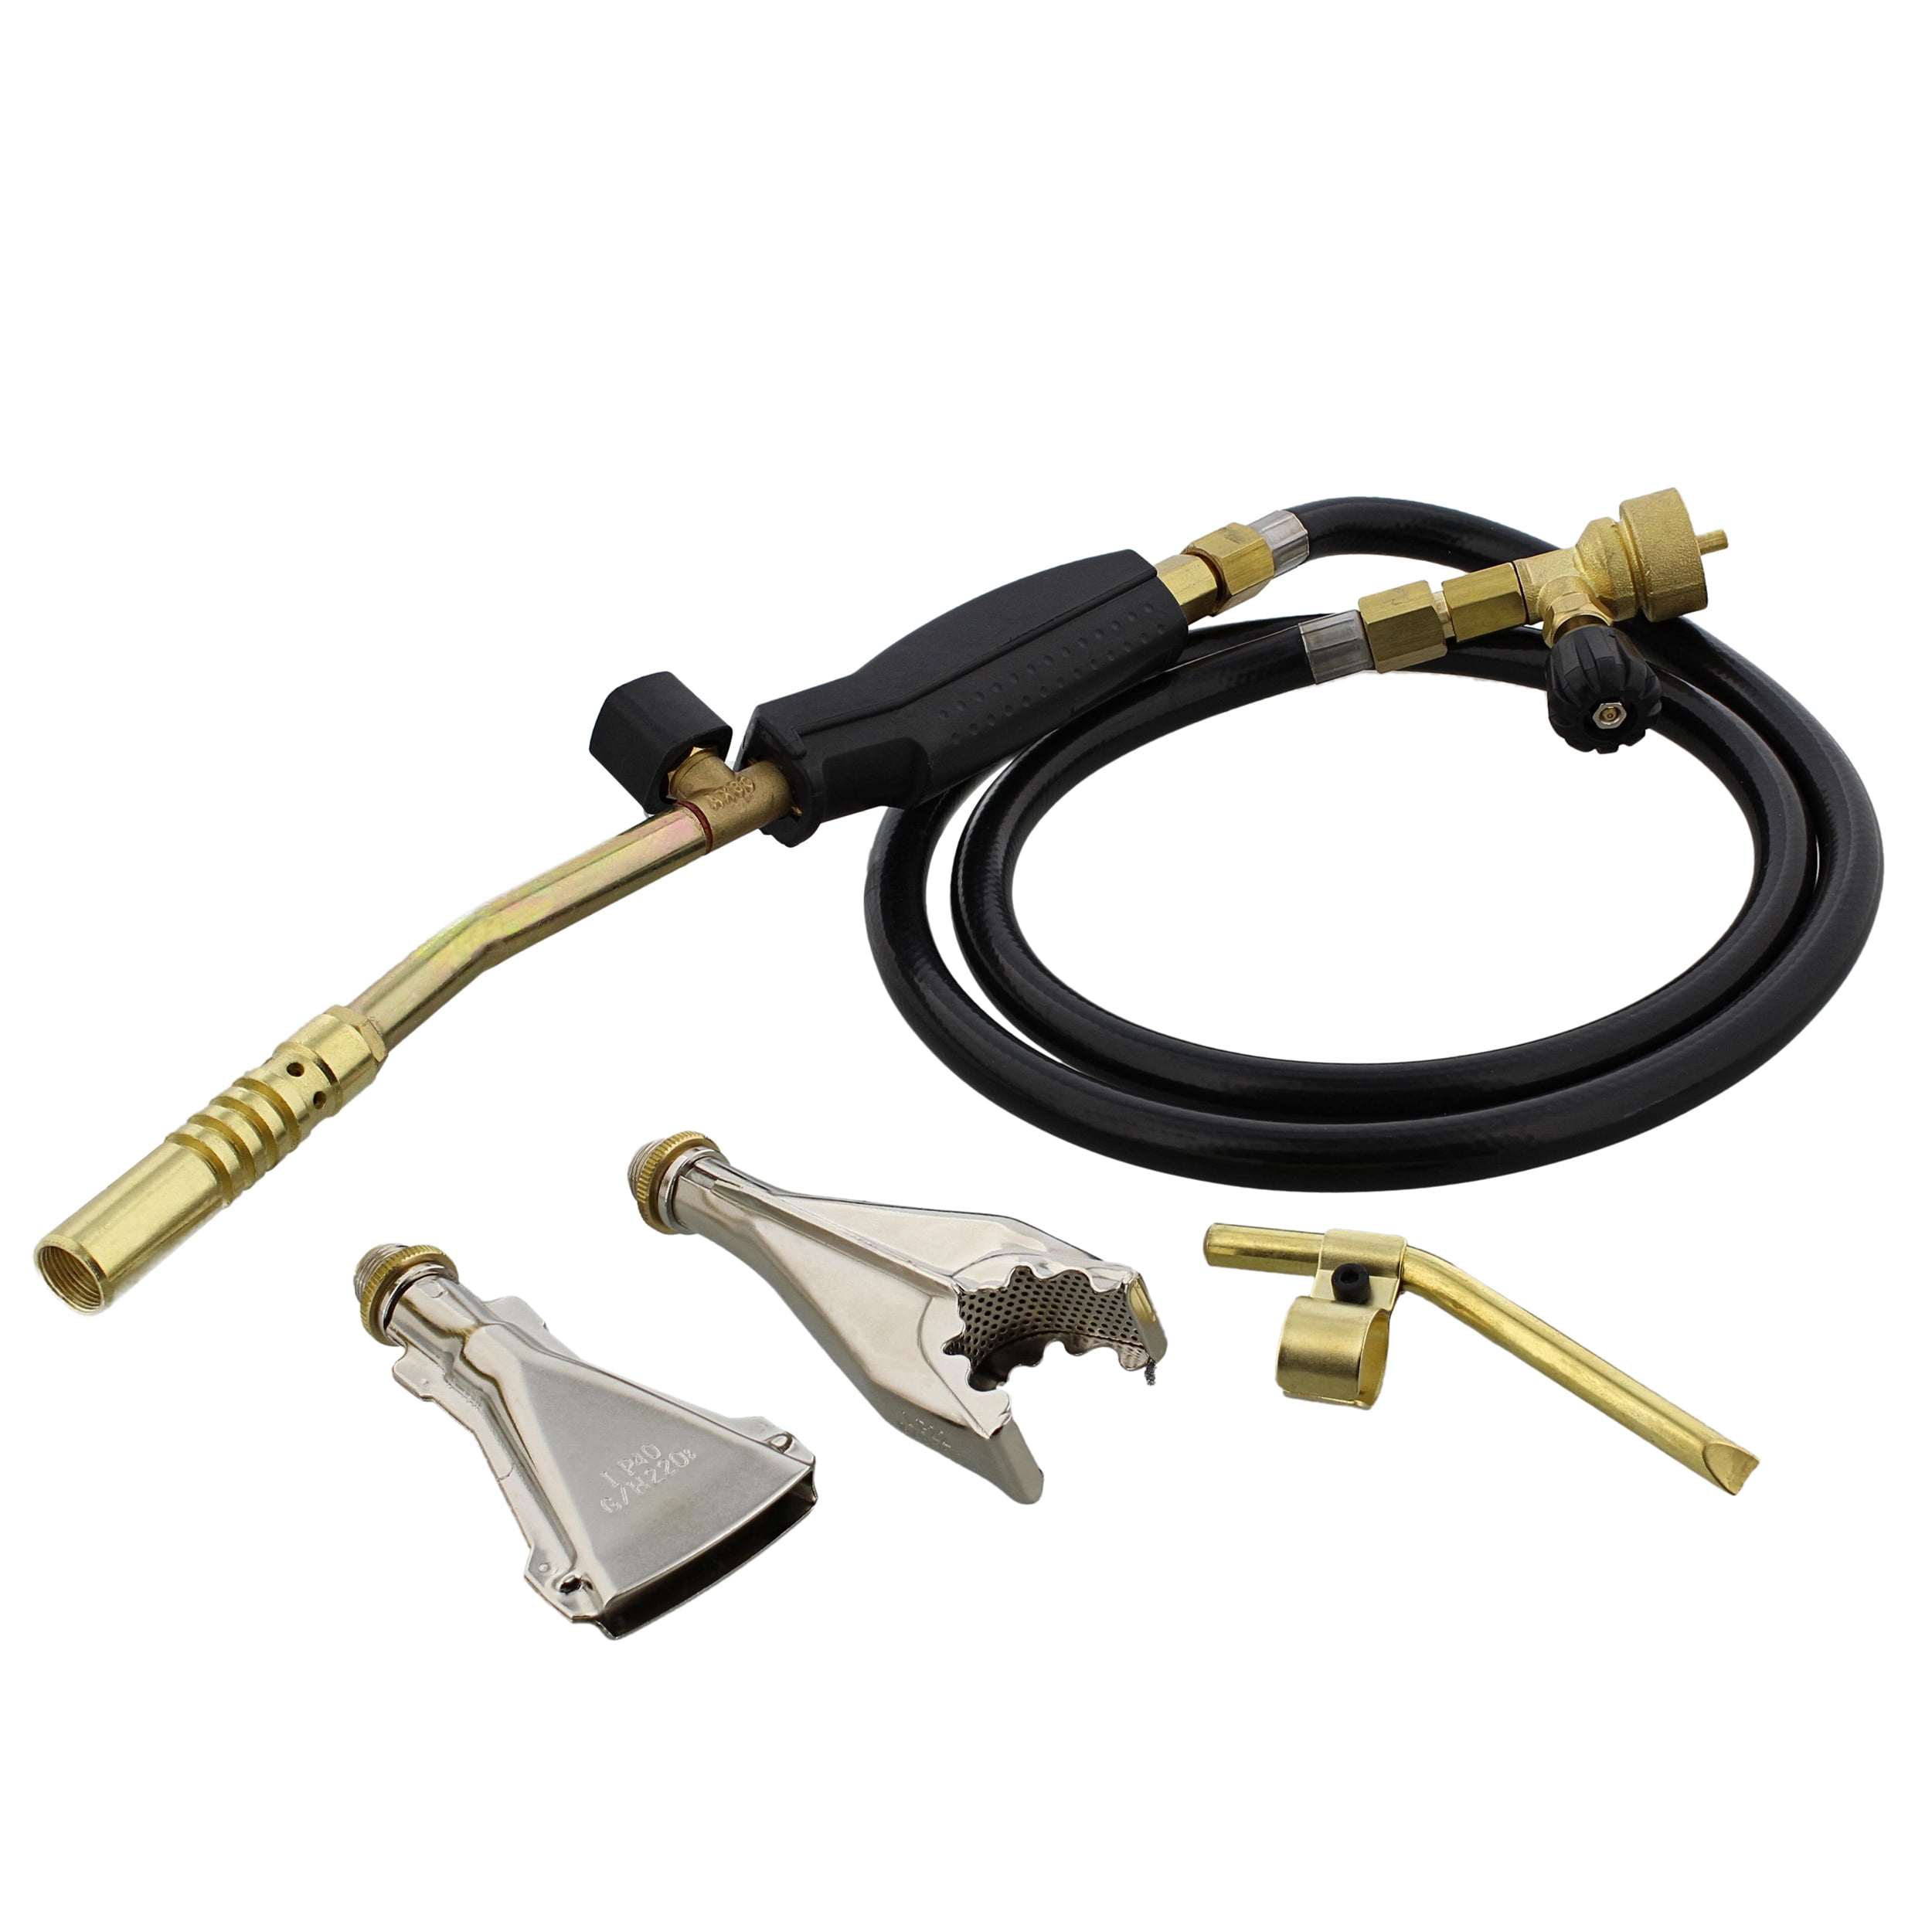 we Details about   Appli Parts single burner hand torch with 5 ft hose and handle for soldering 